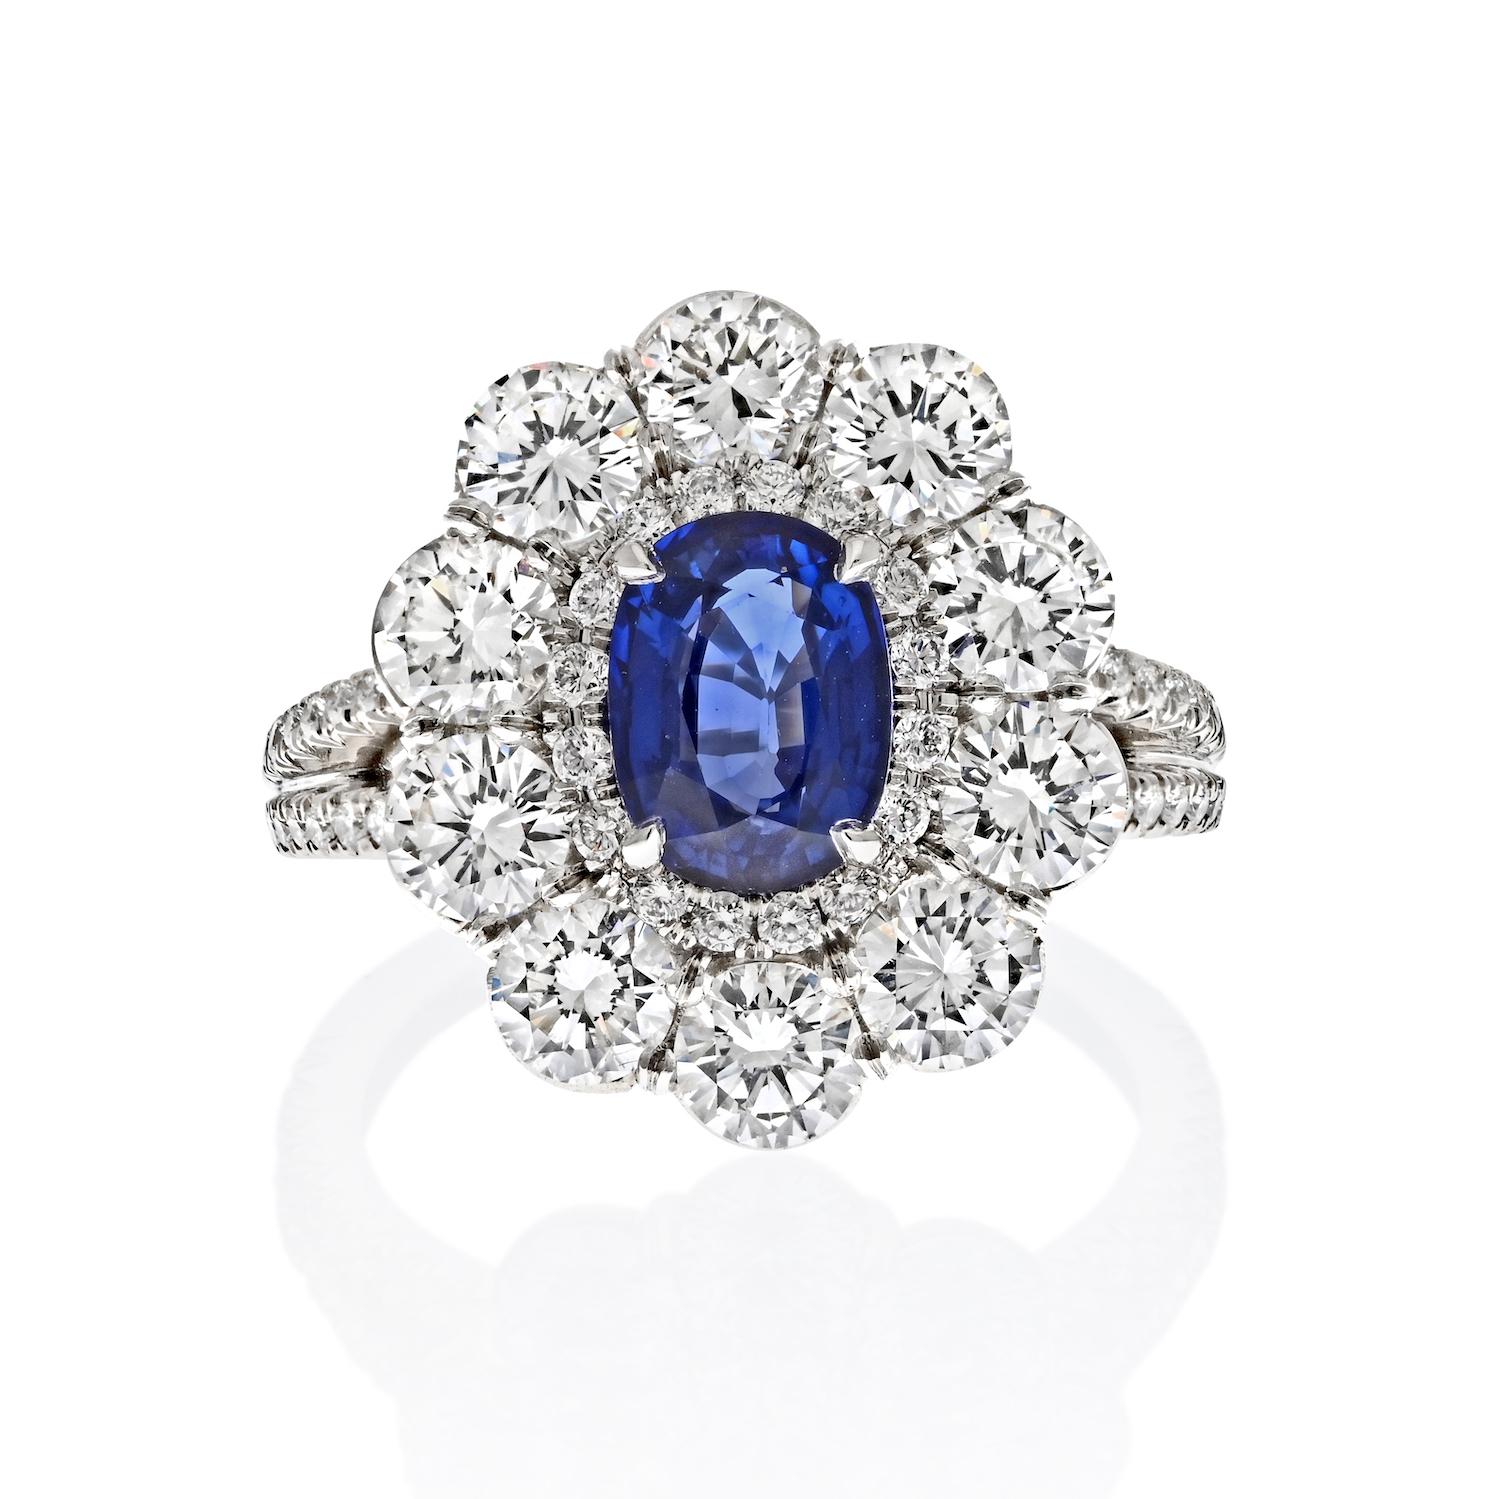 Elegance Meets Refinement: The Oval Cut Blue Sapphire and Diamond Halo Ring

Discover the epitome of grace and sophistication with this exquisite oval-cut blue sapphire and diamond halo ring, a creation inspired by timeless elegance.

**A Gem of